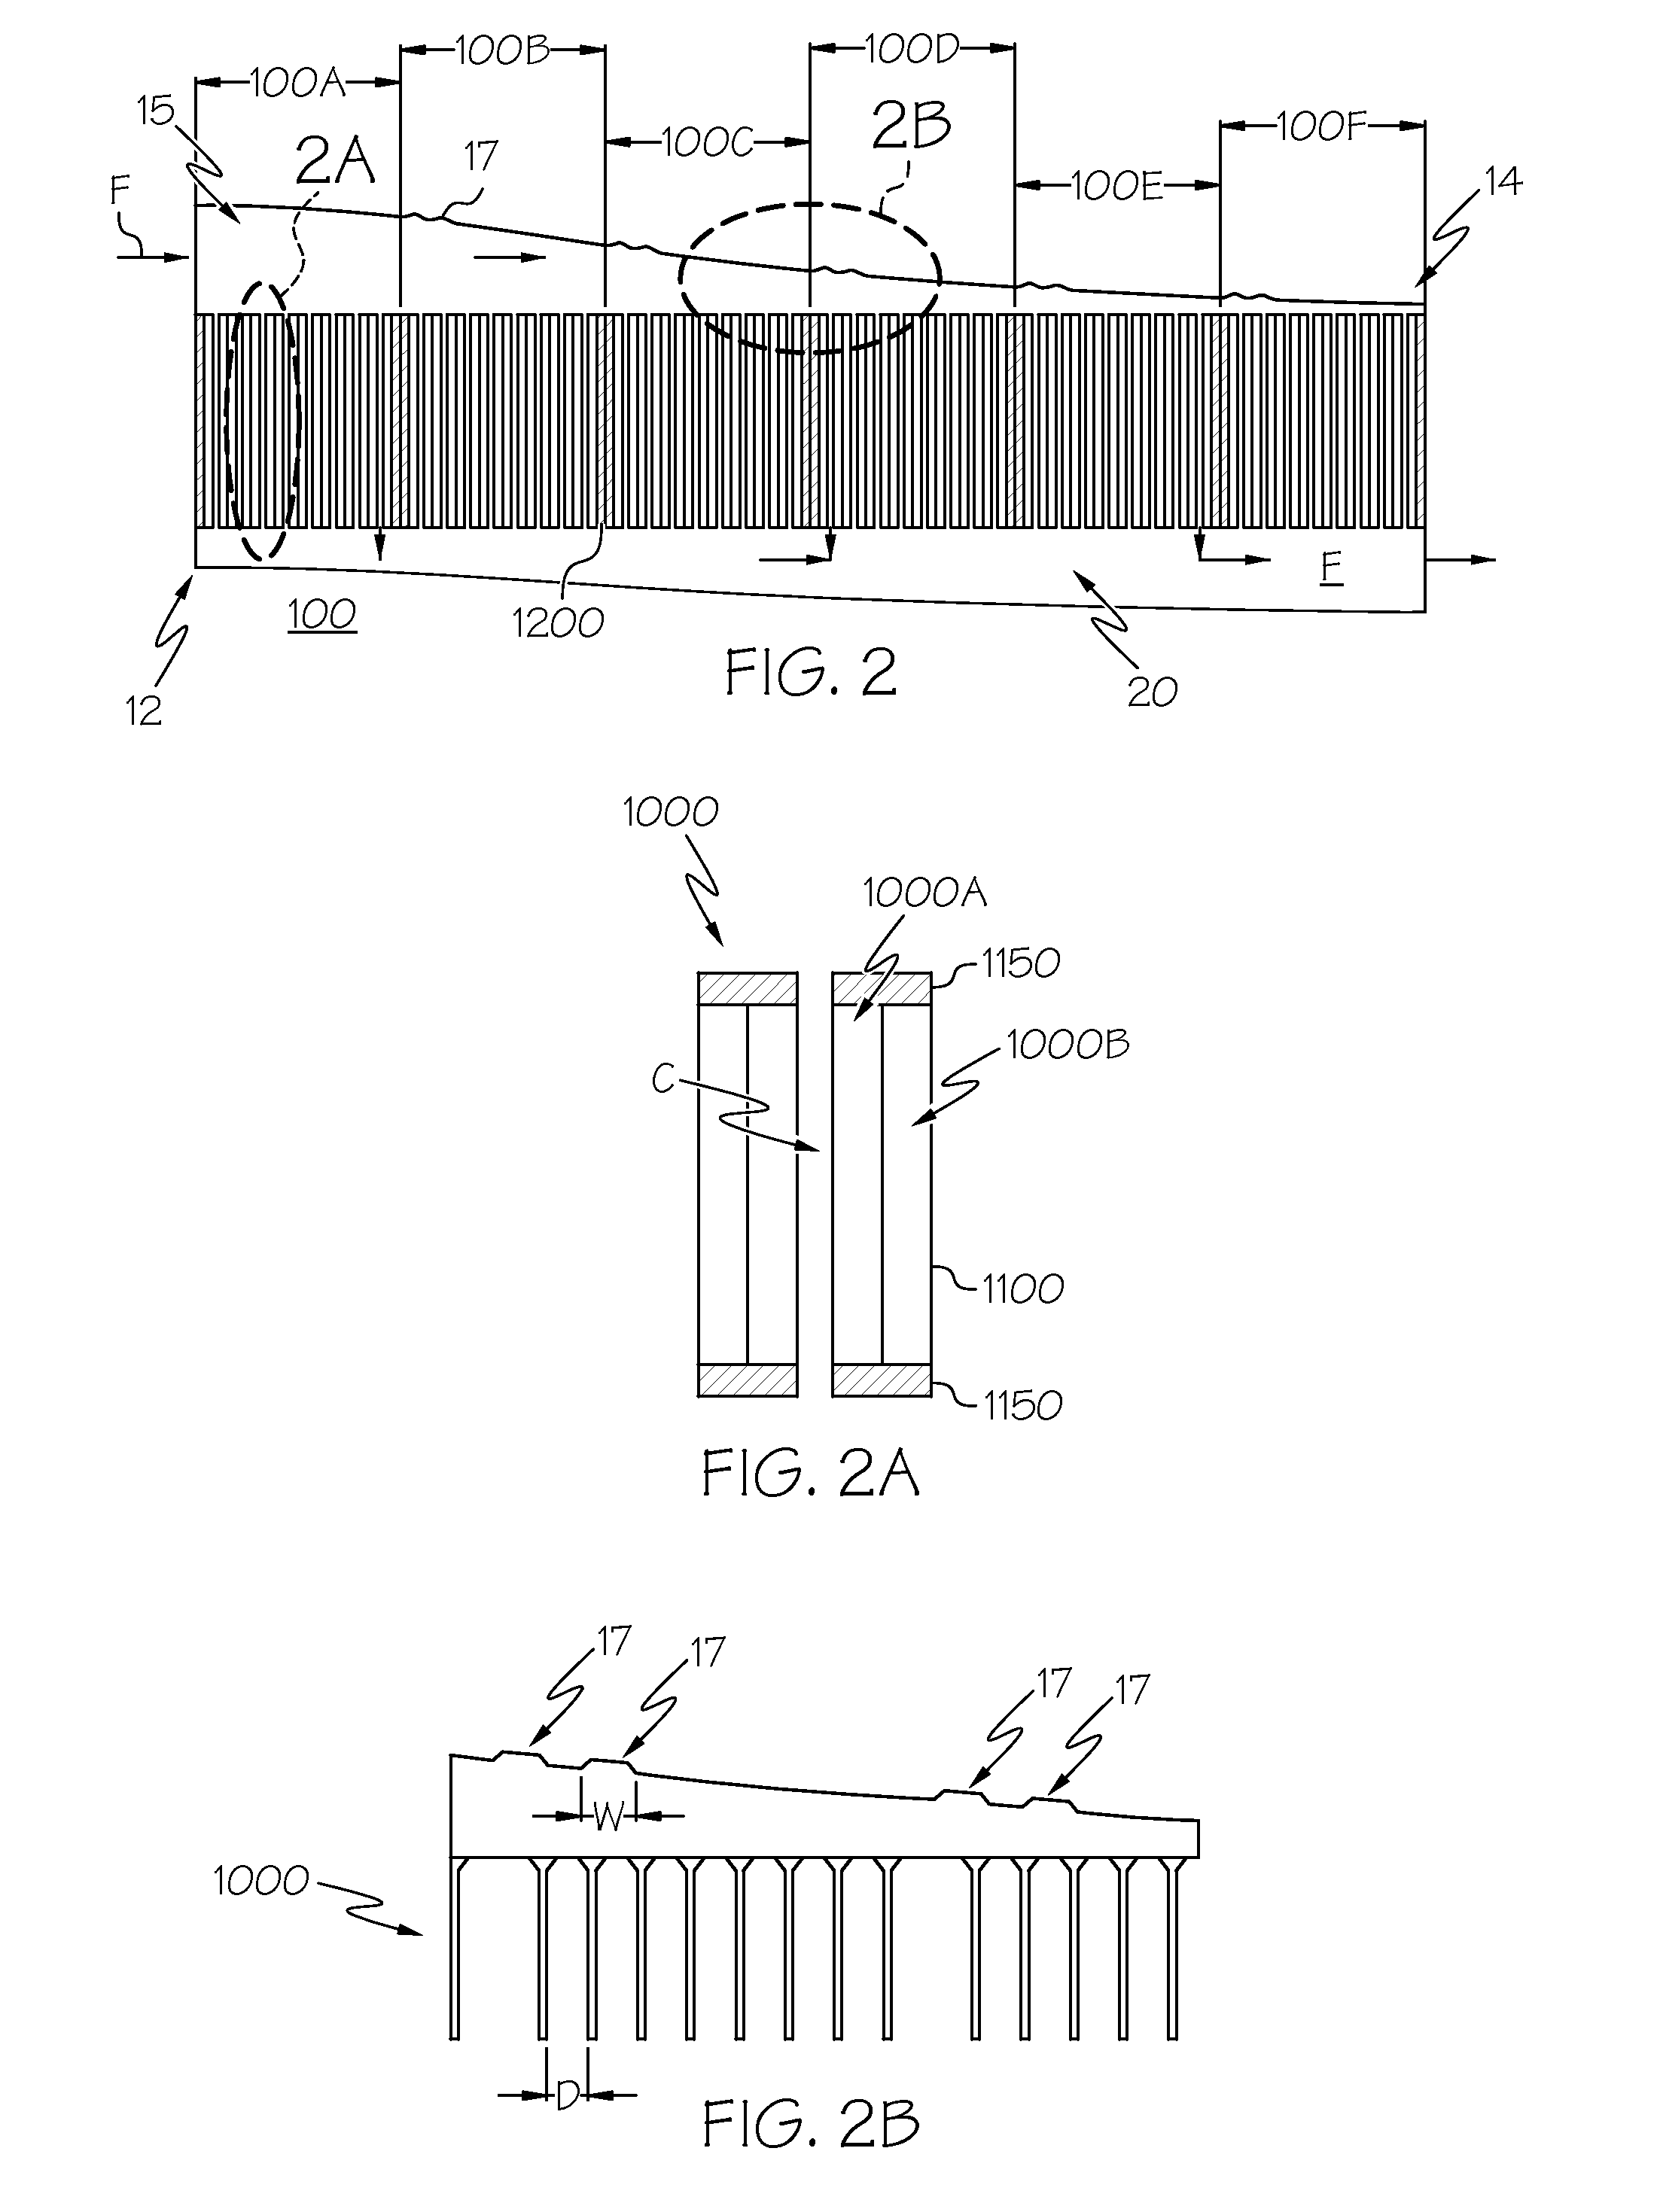 Flow uniformity of air-cooled battery packs